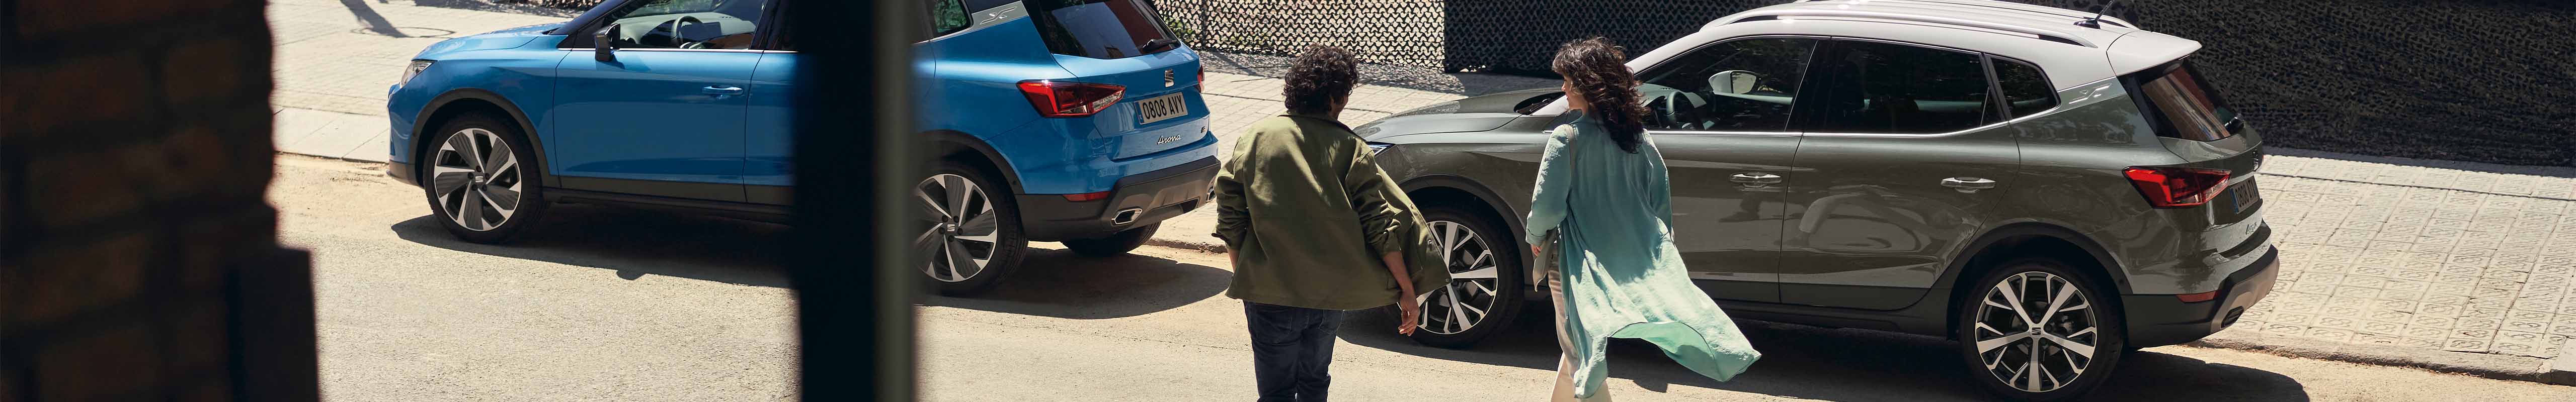 Sunny street scene where a man and a woman are walking towards two SEAT Arona 2024 cars, one blue and one grey parked along the curb. The setting suggests a casual, everyday urban environment.